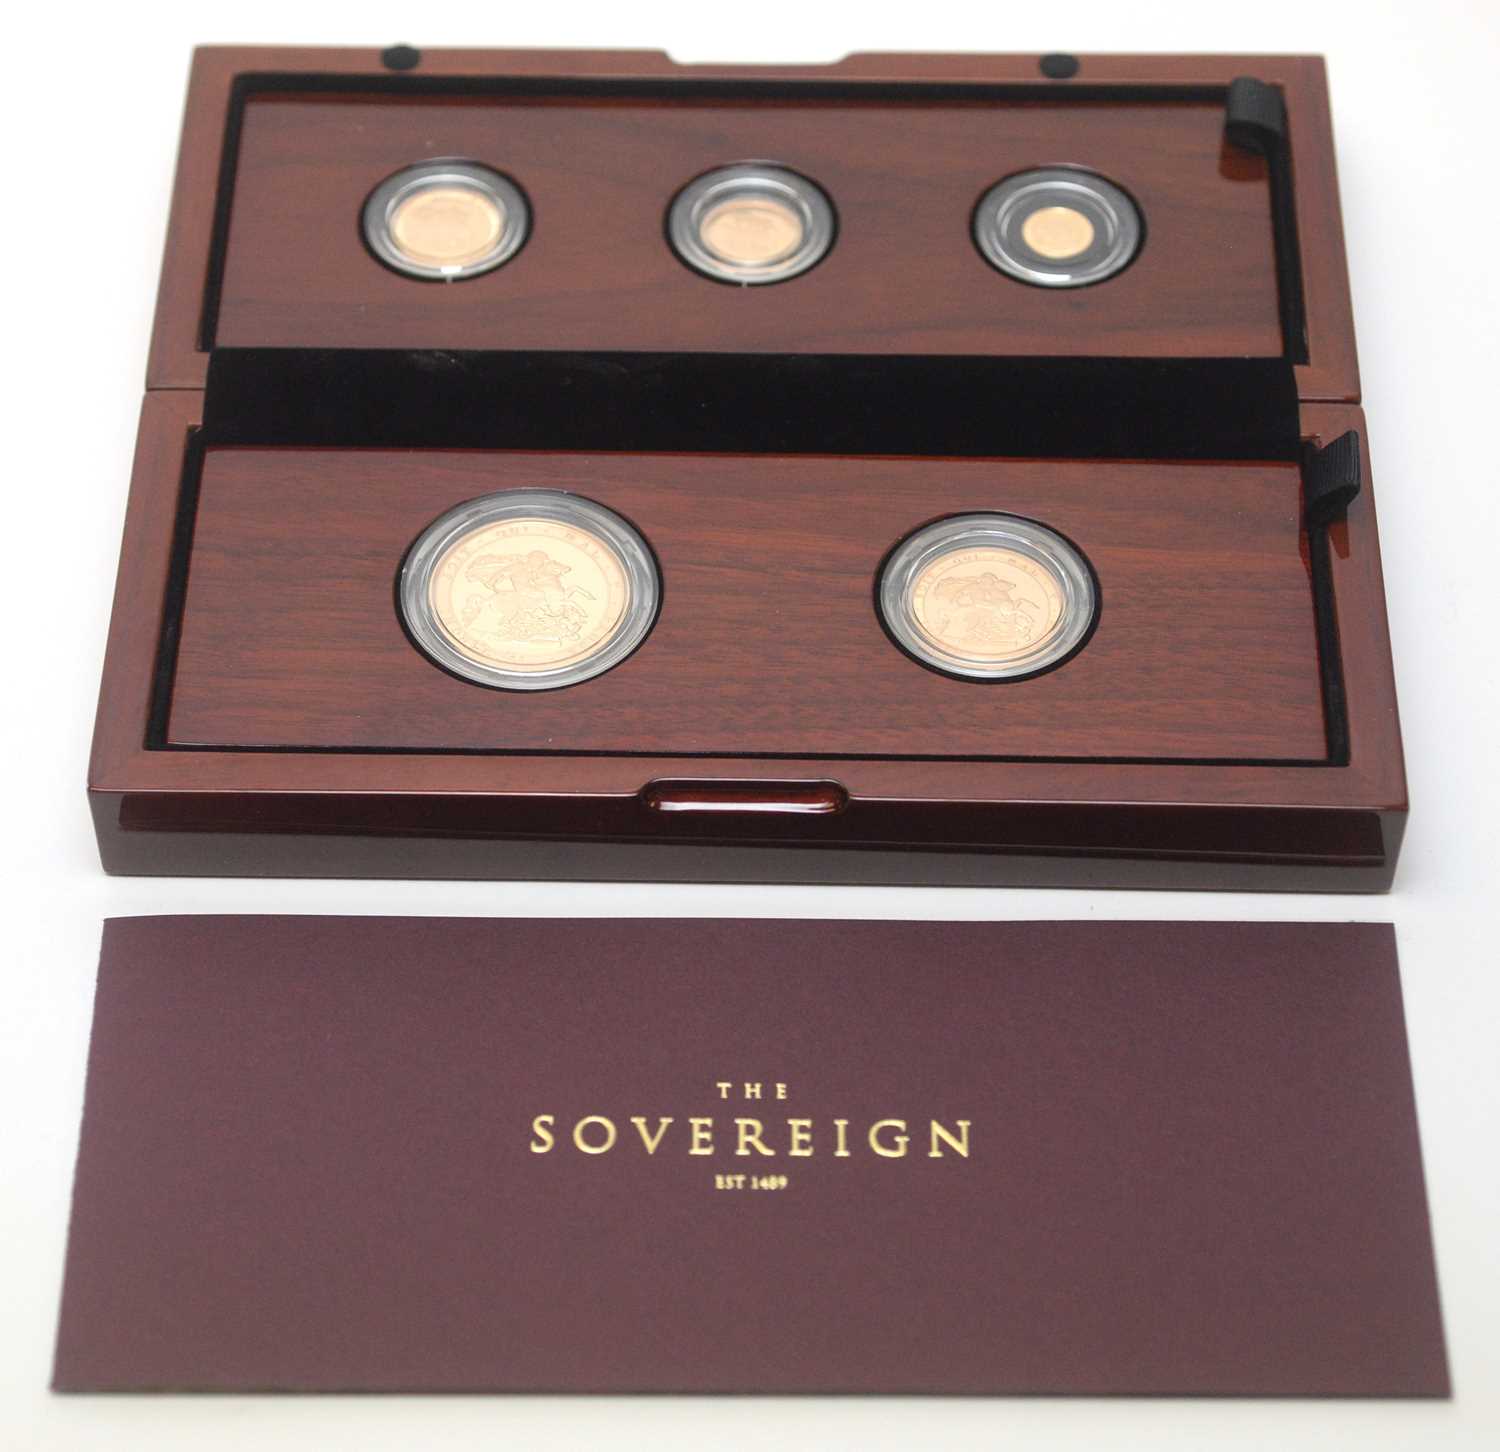 5 - The Sovereign 2017: a five coin proof set